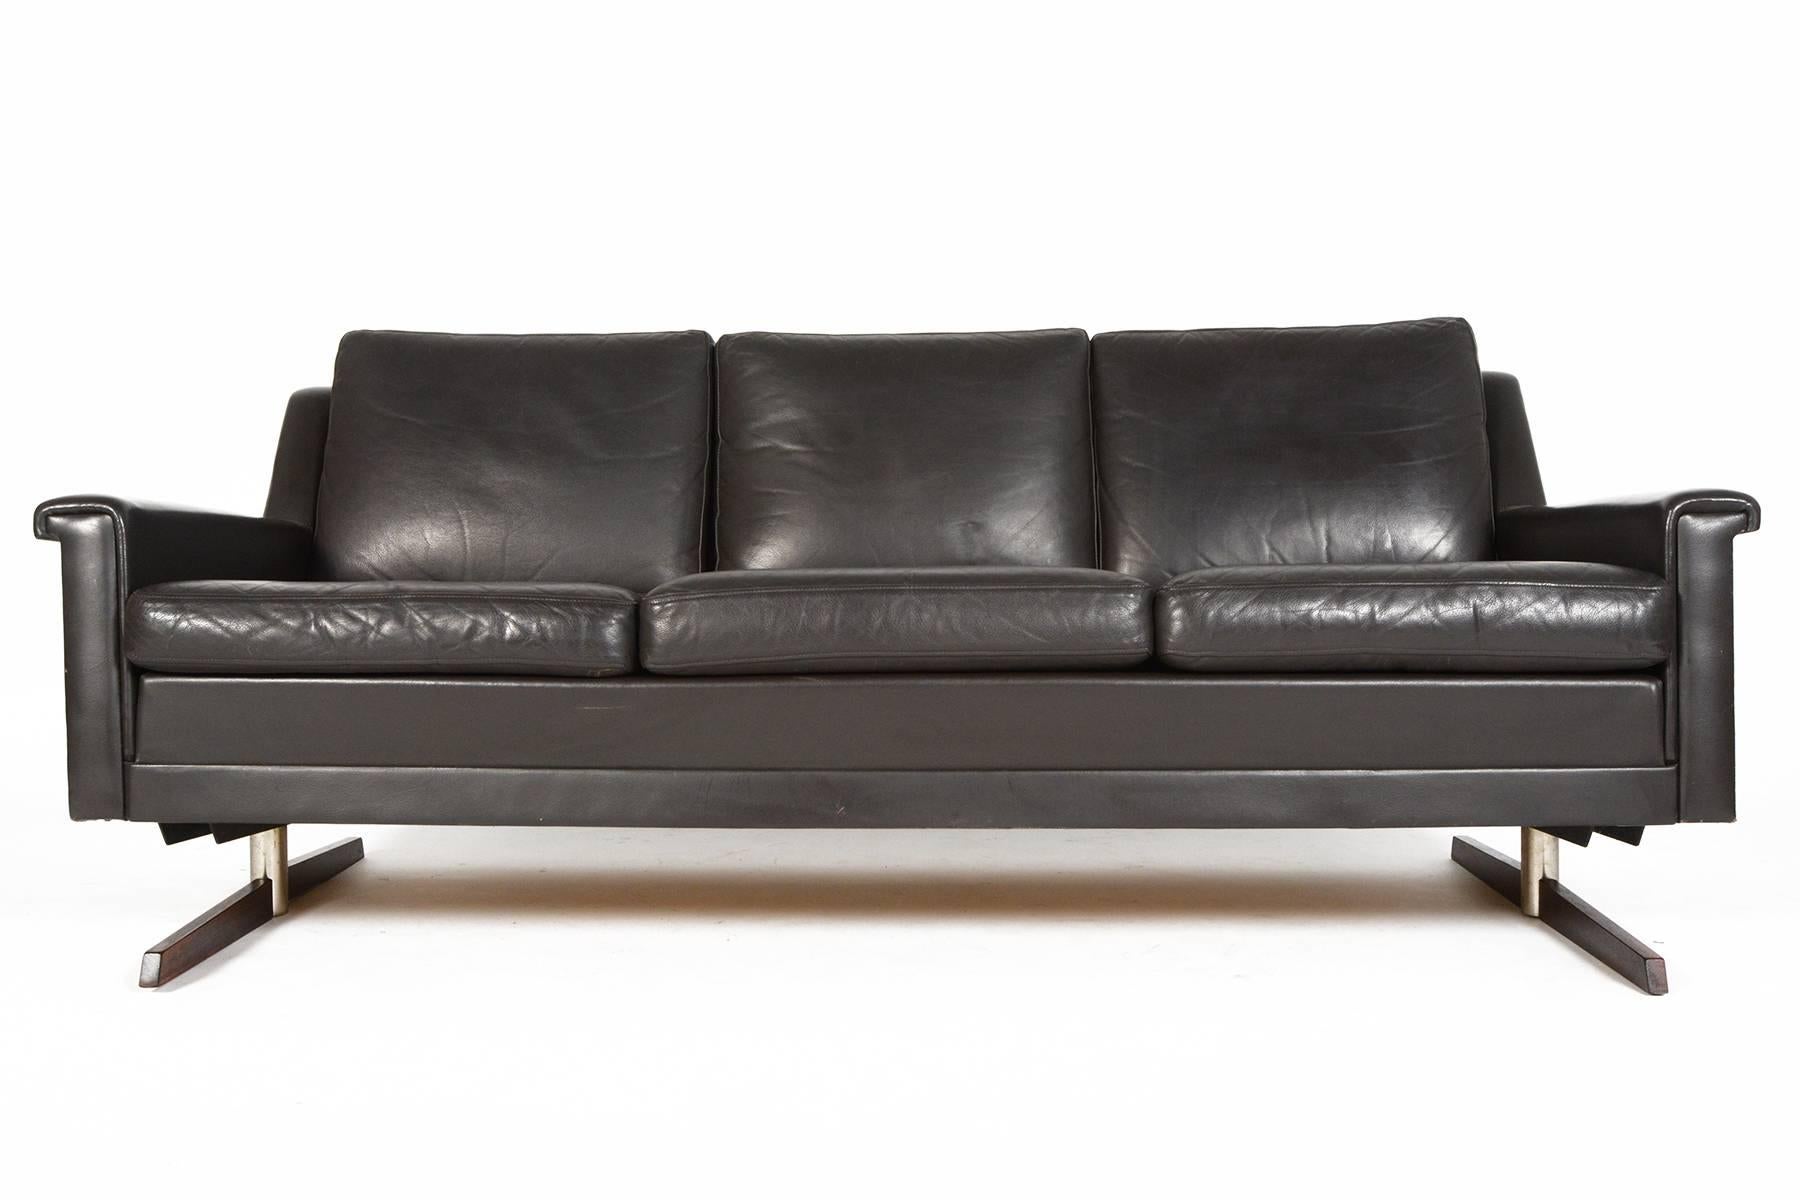 This Danish modern Mid-Century three-seat sofa in chocolate leather offers a Classic Silhouette with an early 1970s modern steel and rosewood base. Cushions wear their original patinated deep chocolate leather upholstery. Finished on all sides, this